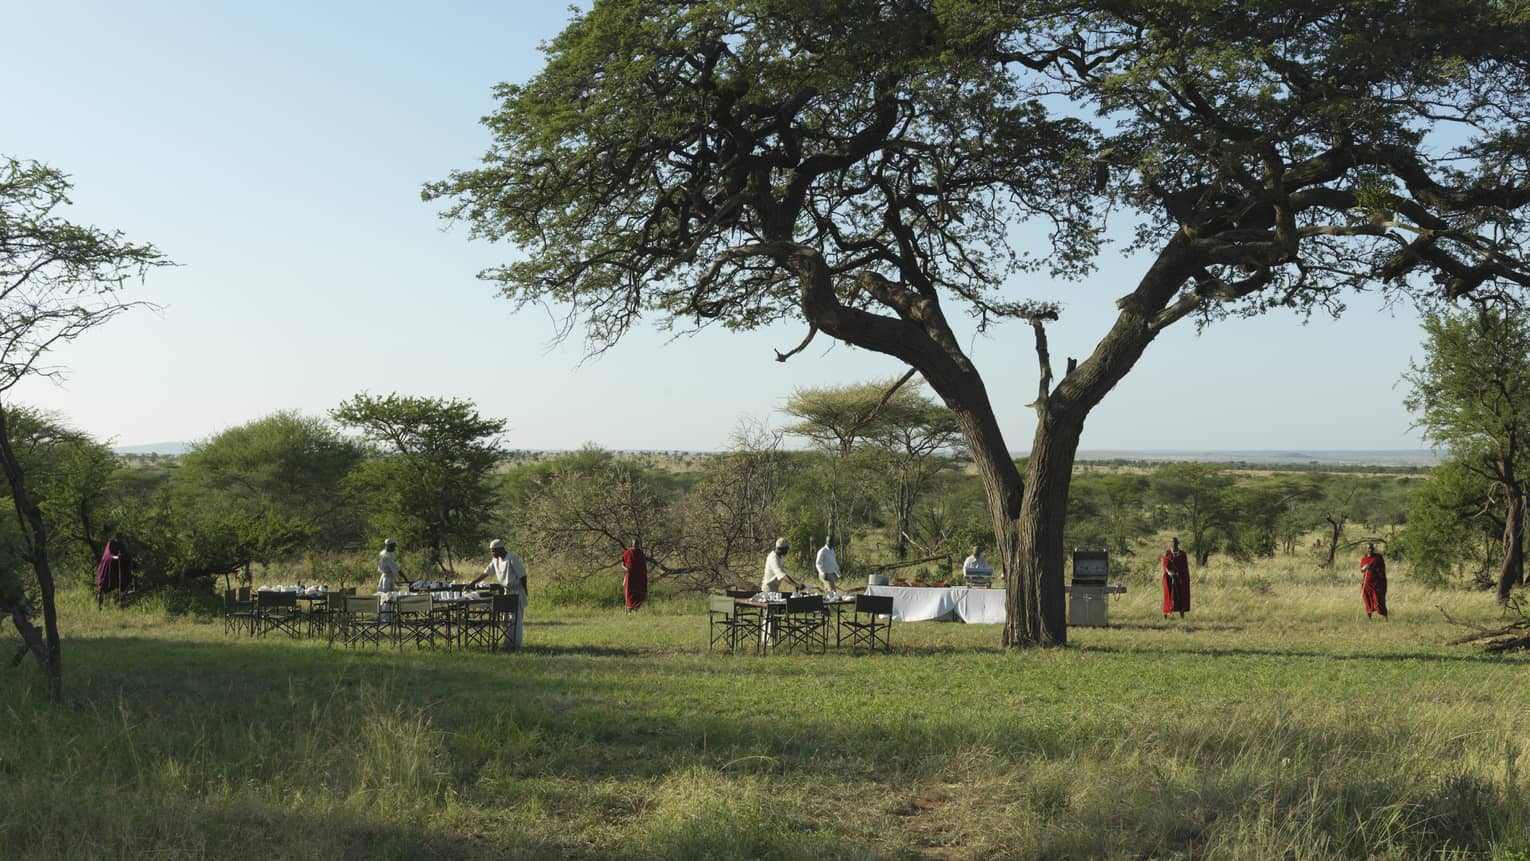 Staff set outdoor table and chairs as Maasai stand nearby at the outdoor meeting pit